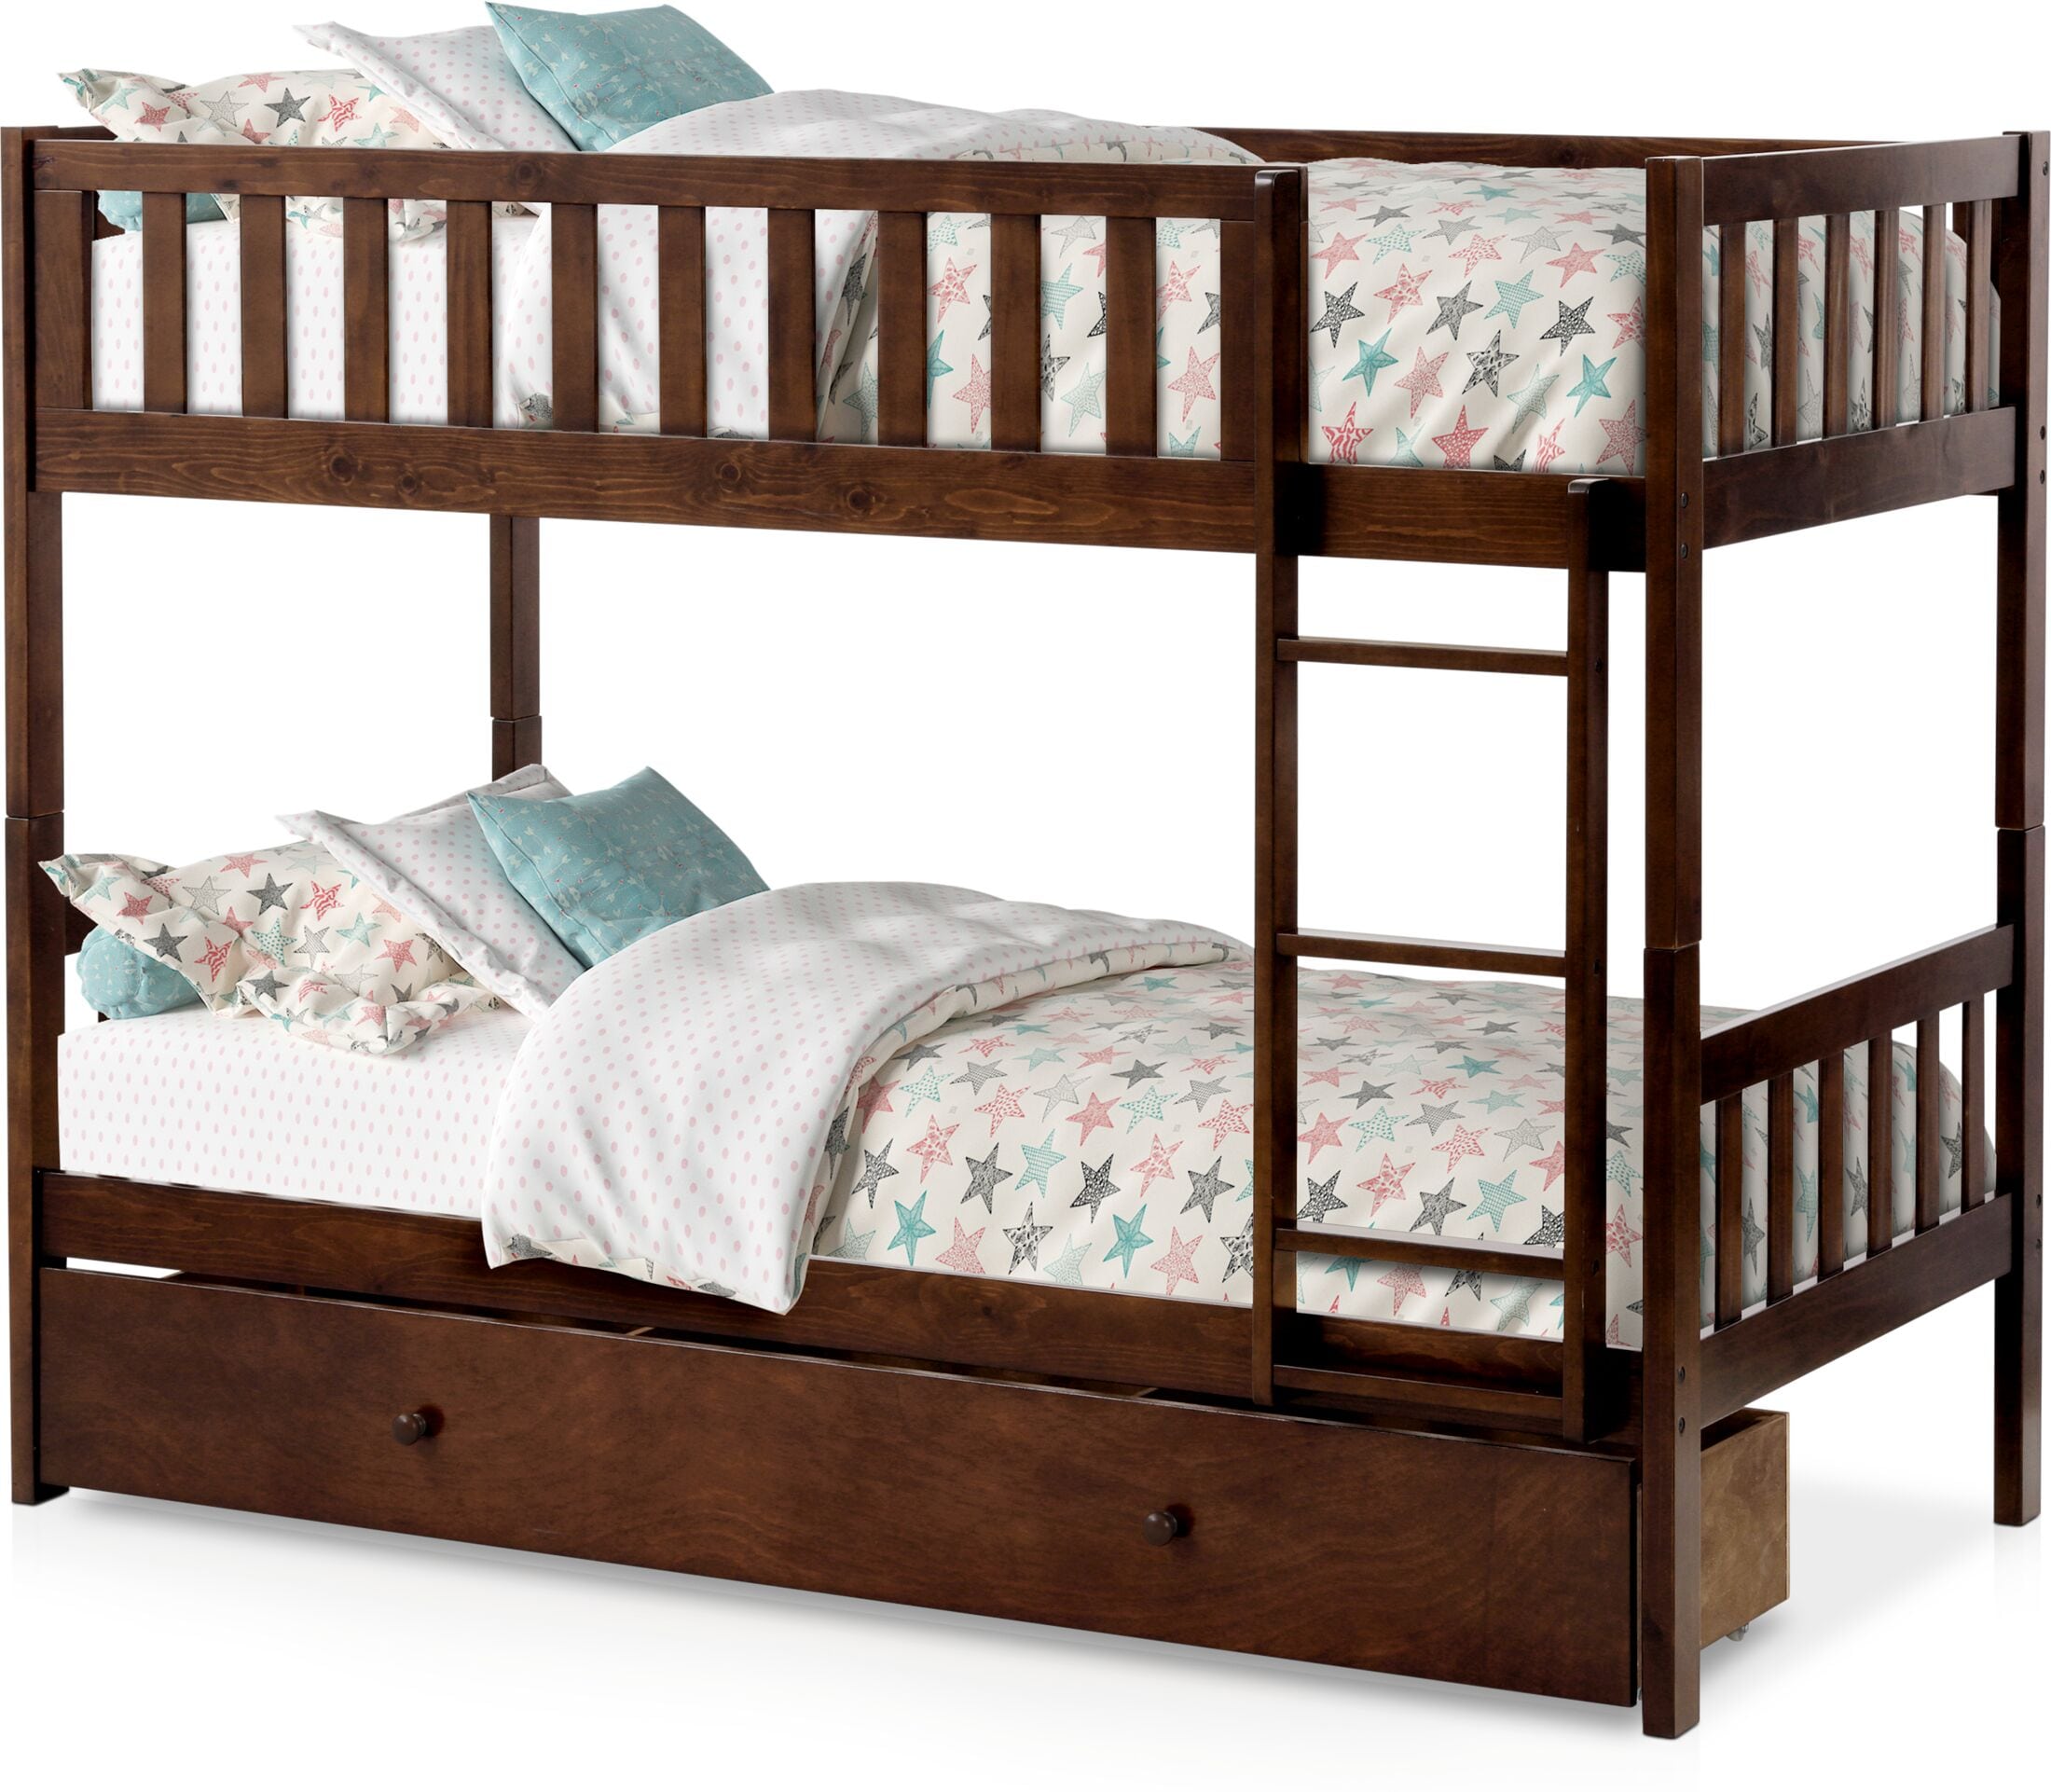 Undefined Value City Furniture, Stanley Furniture Company Bunk Bed Instructions